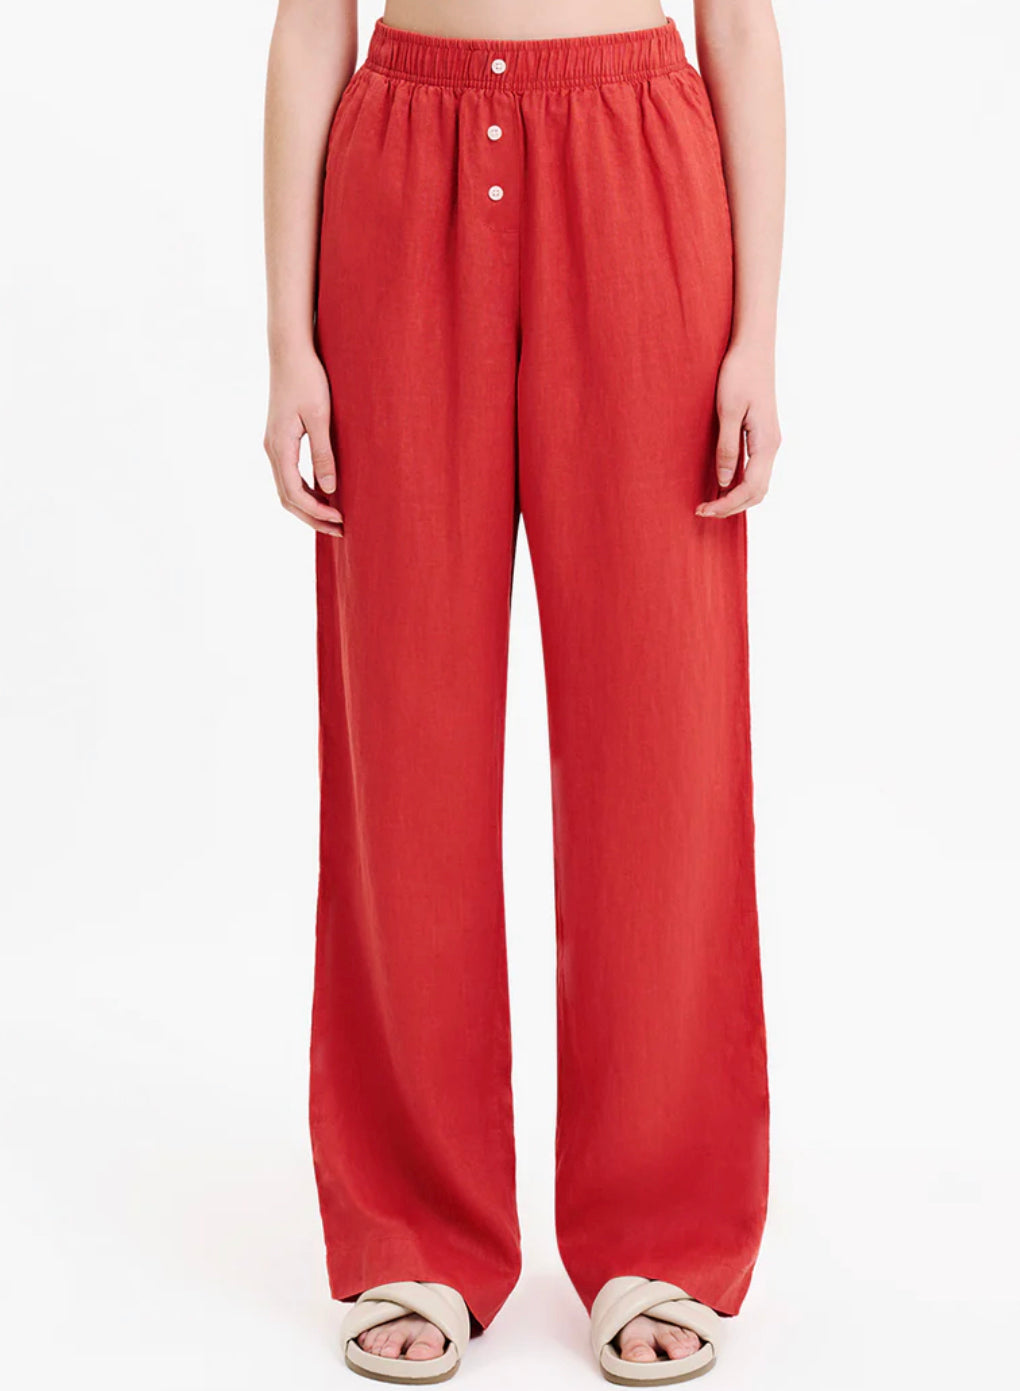 Nude Lucy Lounge Linen Pant - Coral